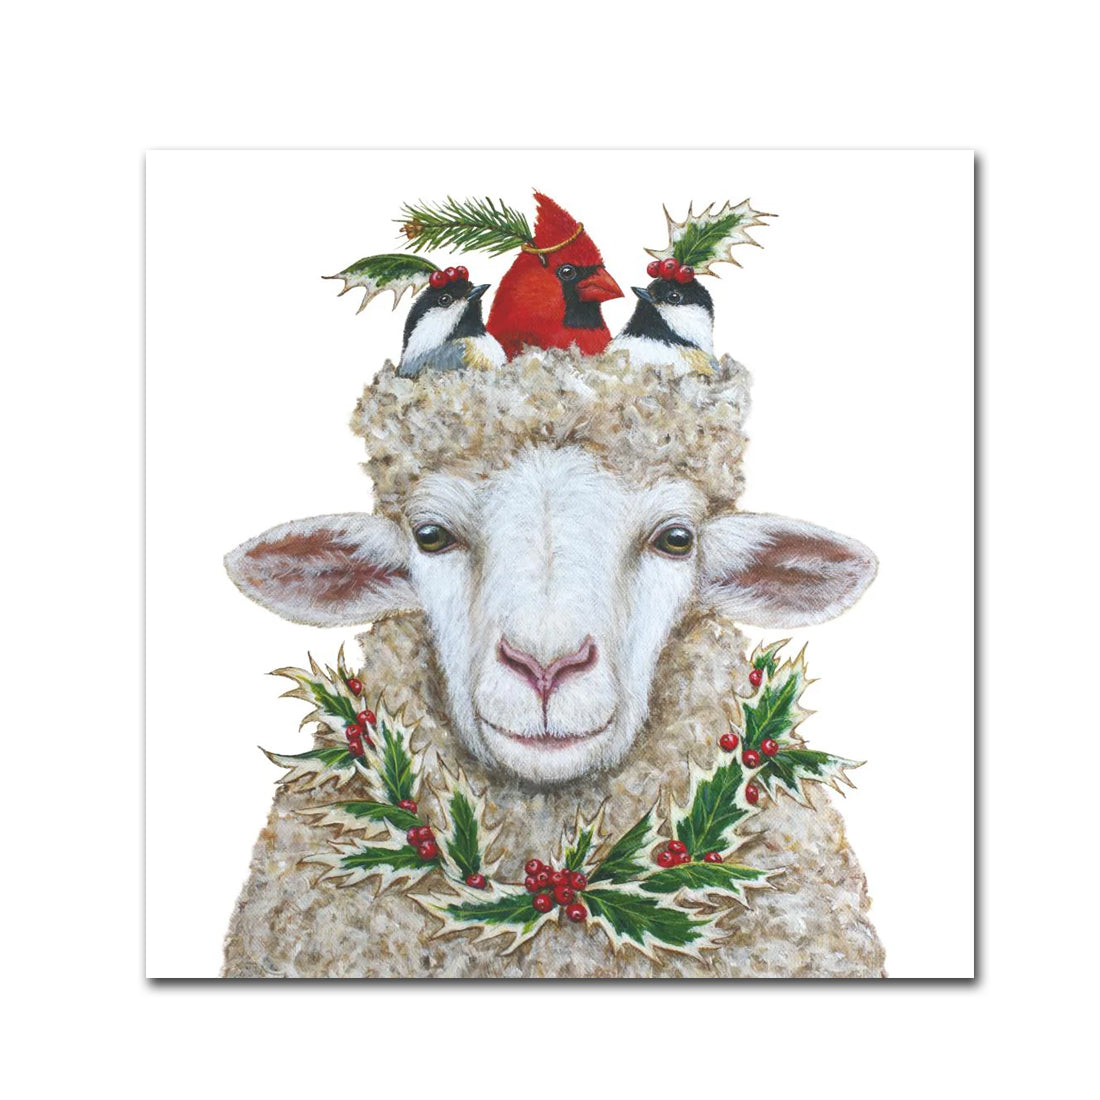 Off To The Party - Sheep Holiday Beverage Napkins by Vicki Sawyer